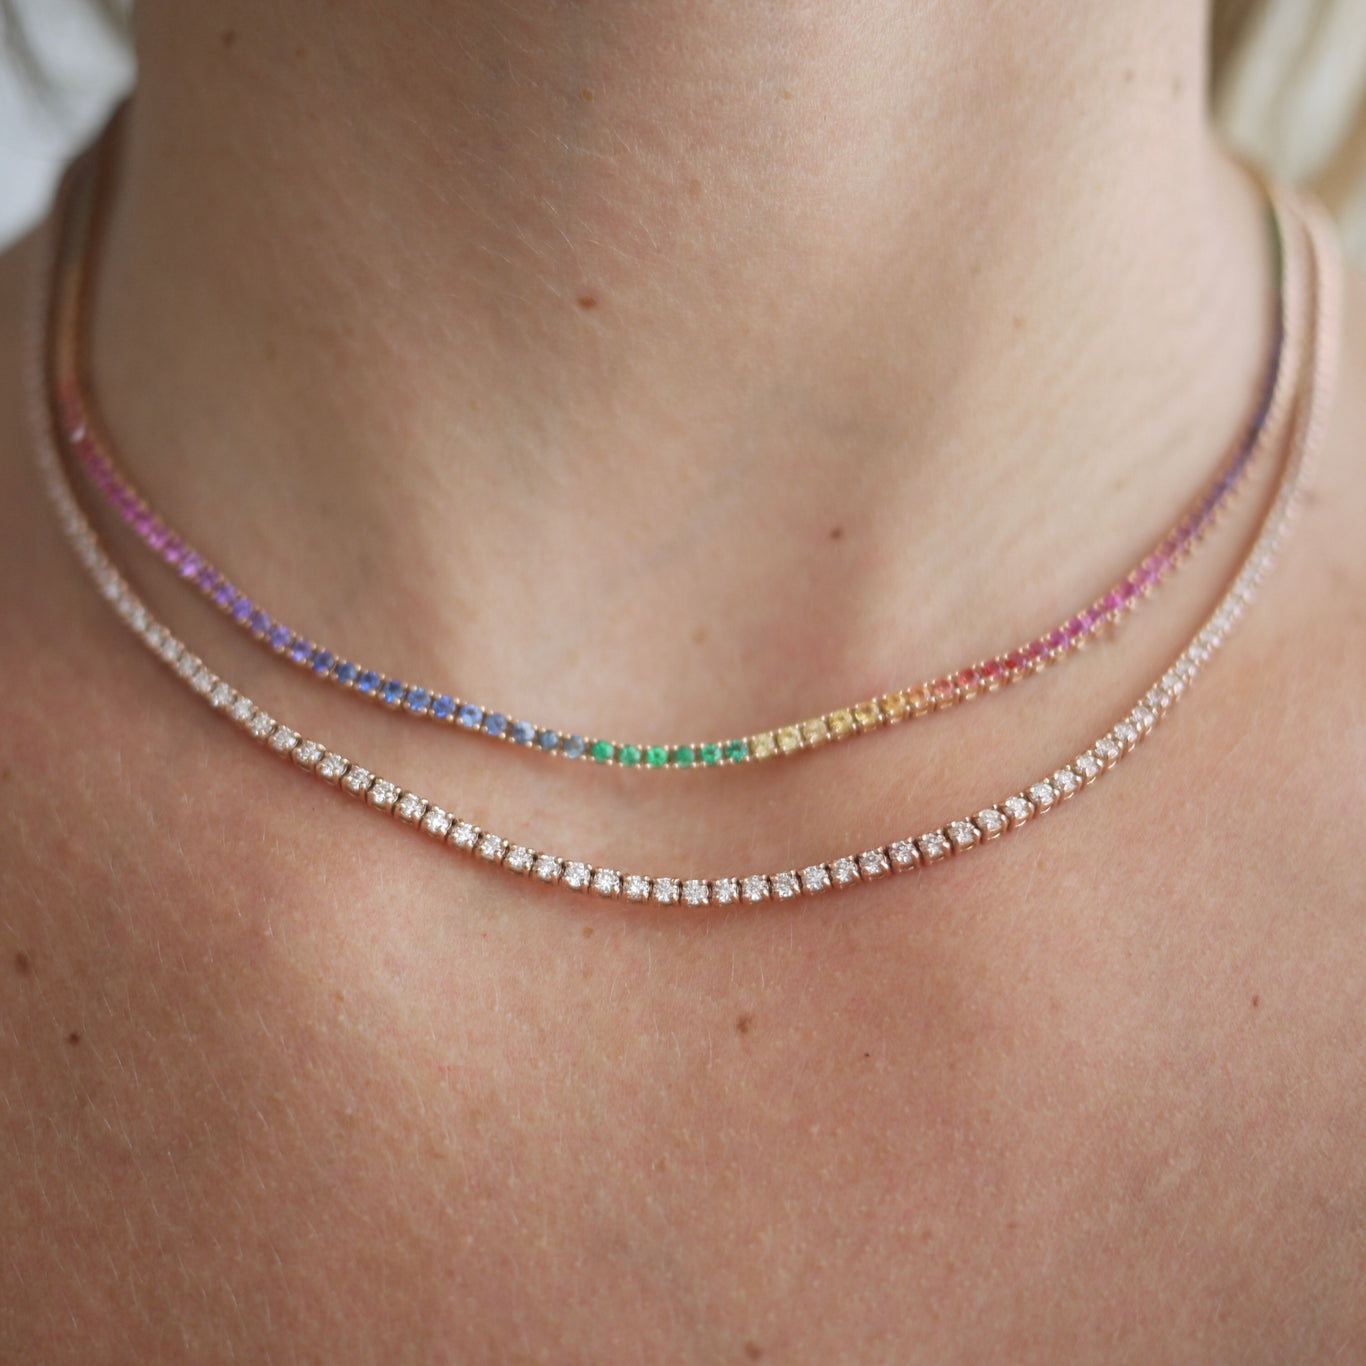 5.25 Carat Tennis Necklace shown below the Rainbow Tennis Necklace in rose gold.